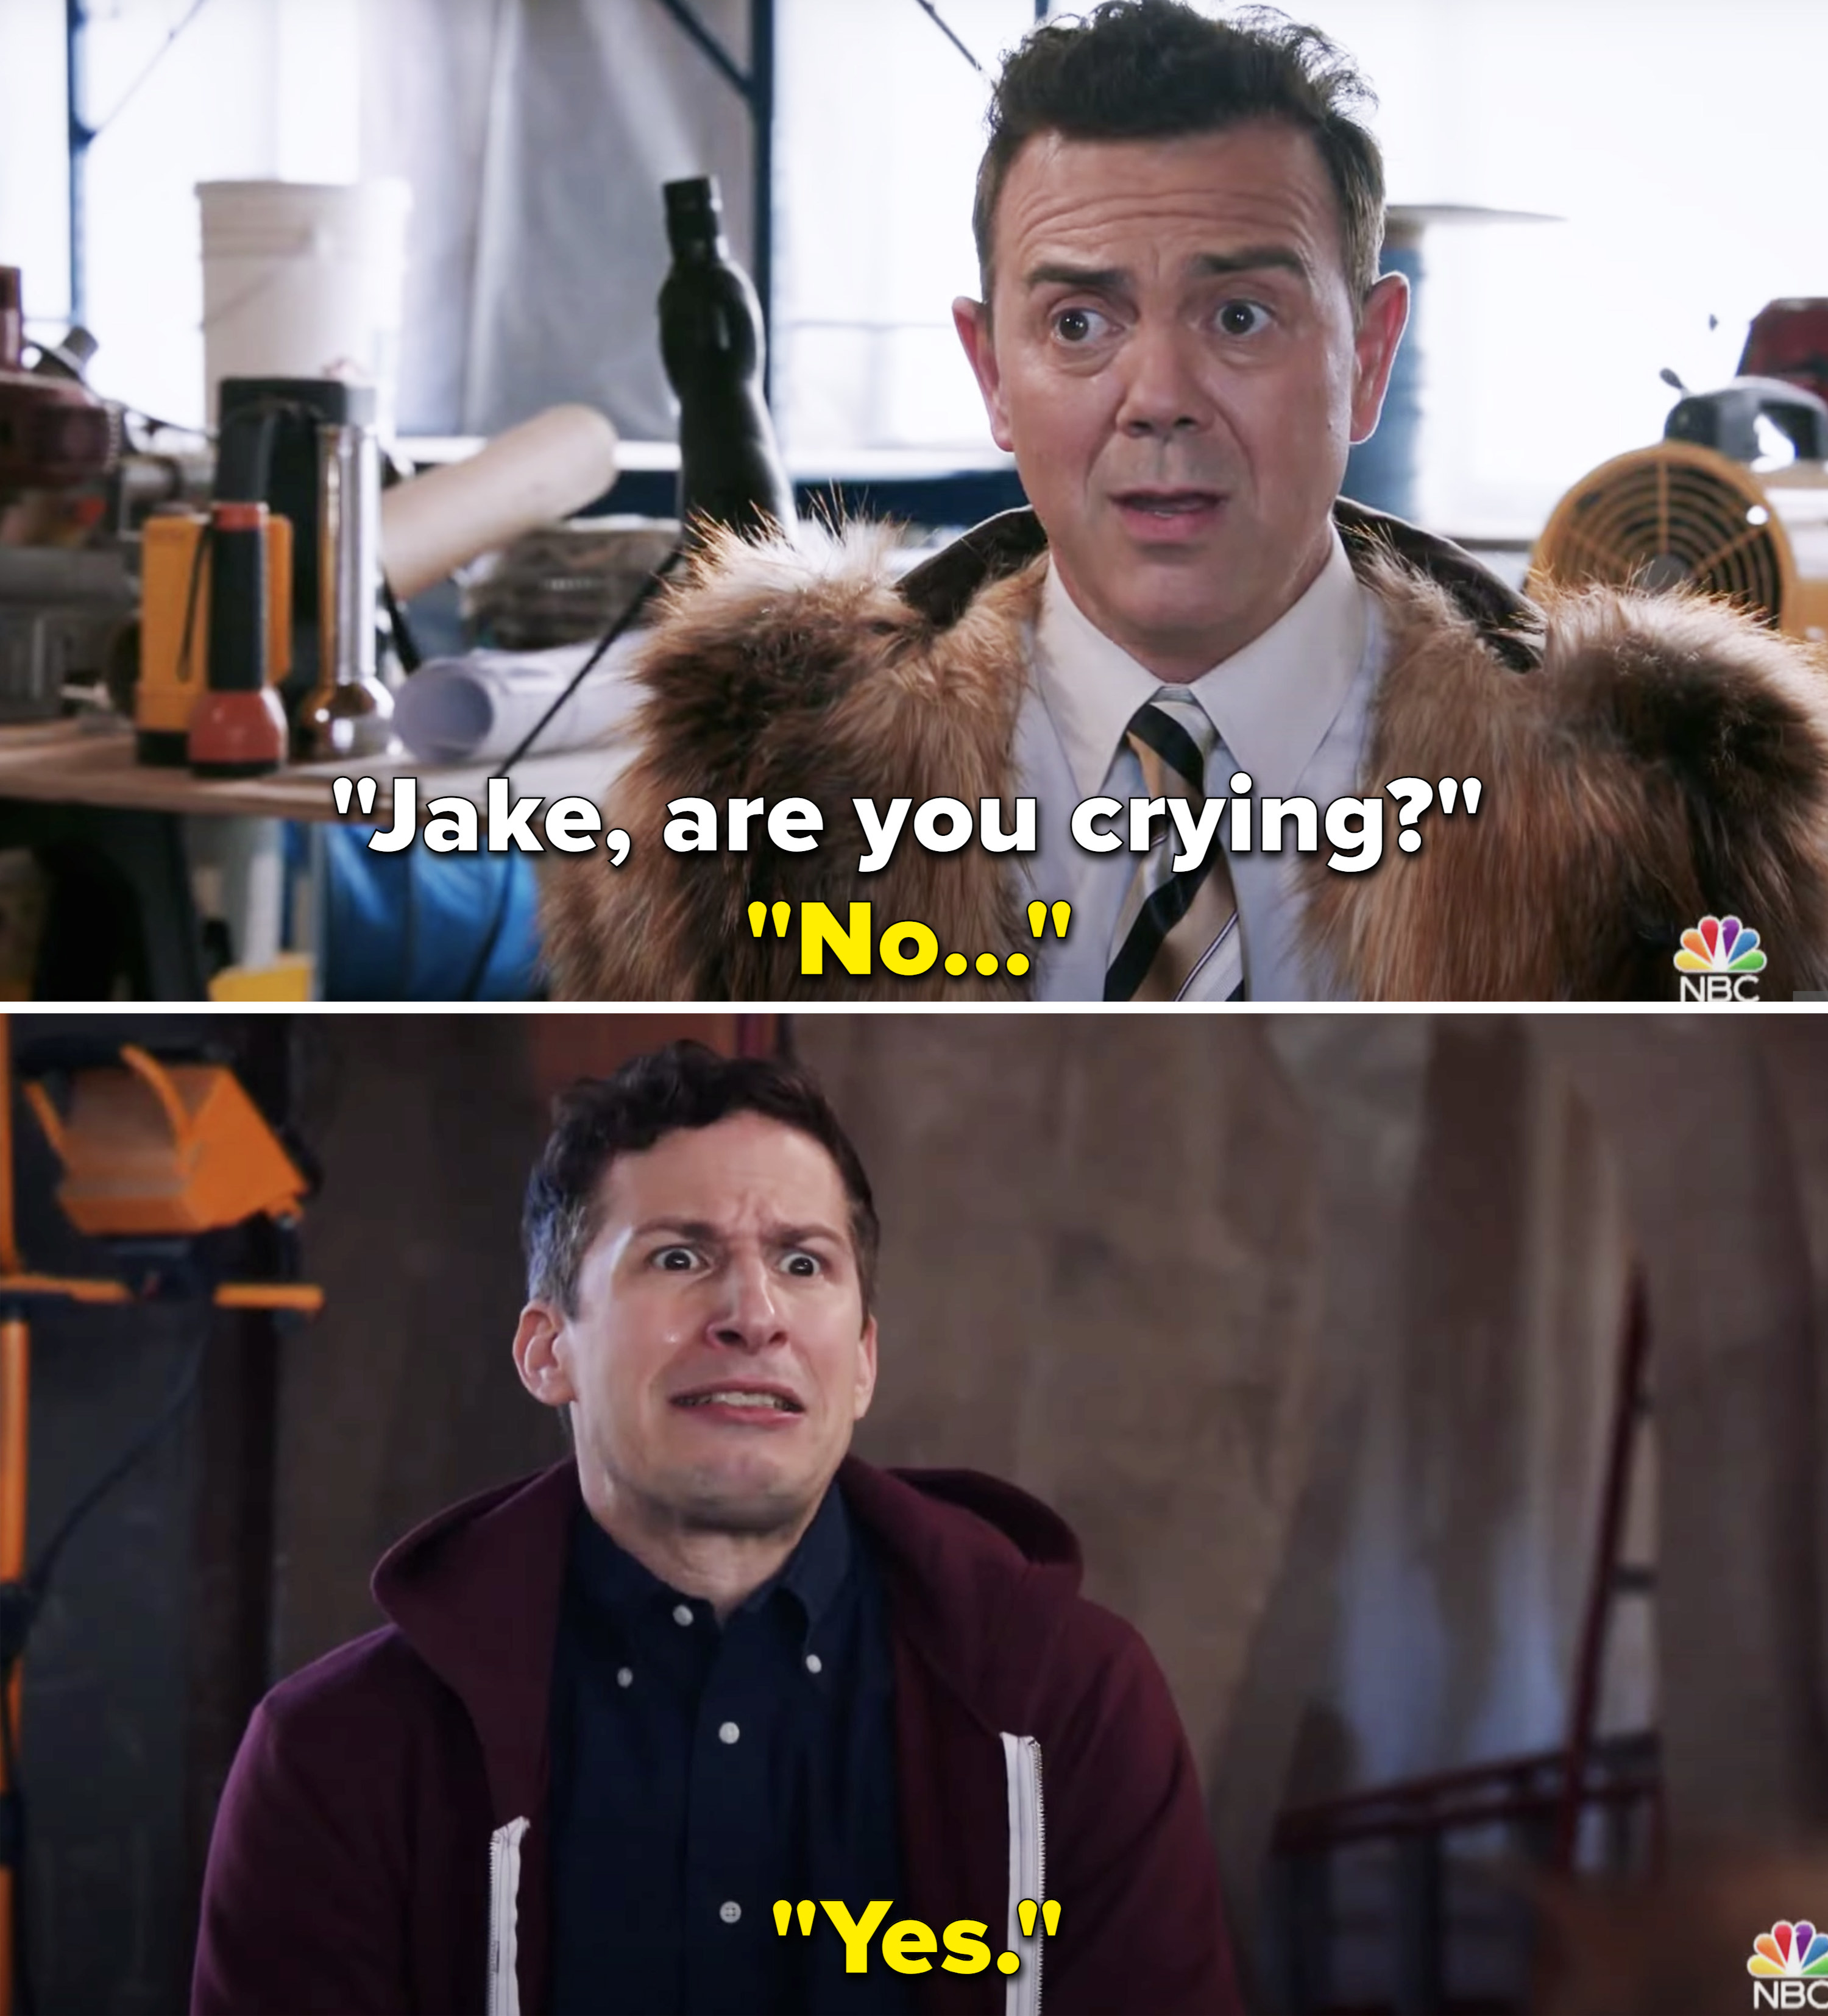 Jake being asked if he&#x27;s crying to which he responds &quot;No&quot; and then &quot;Yes&quot;